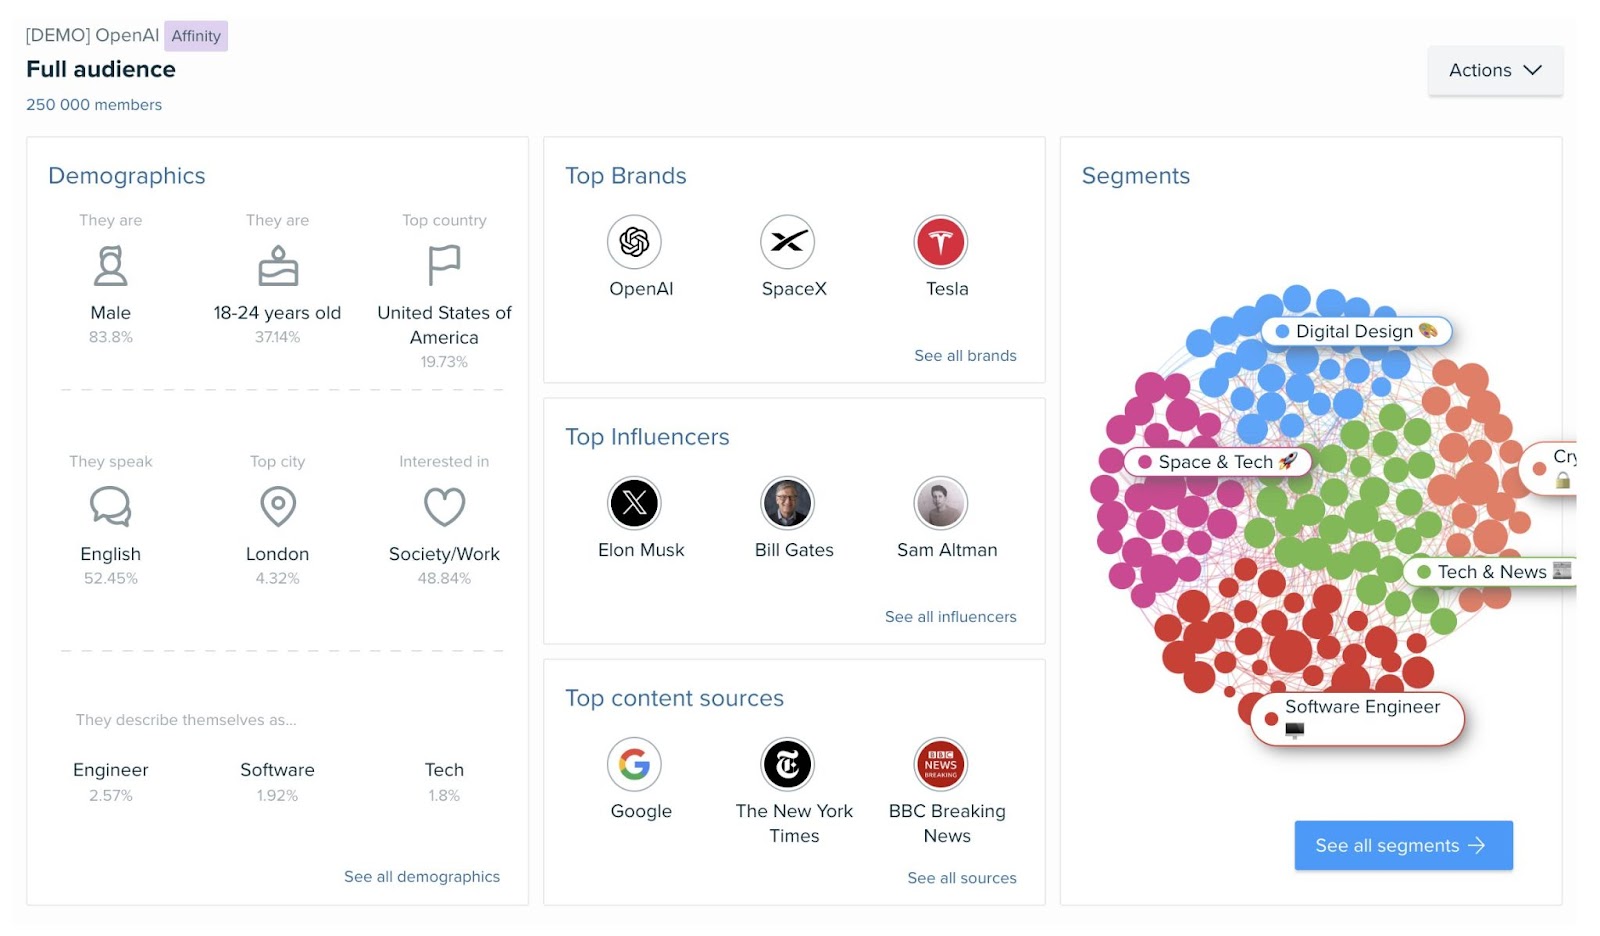 "Full audience" dashboard in Audience Intelligence Tool